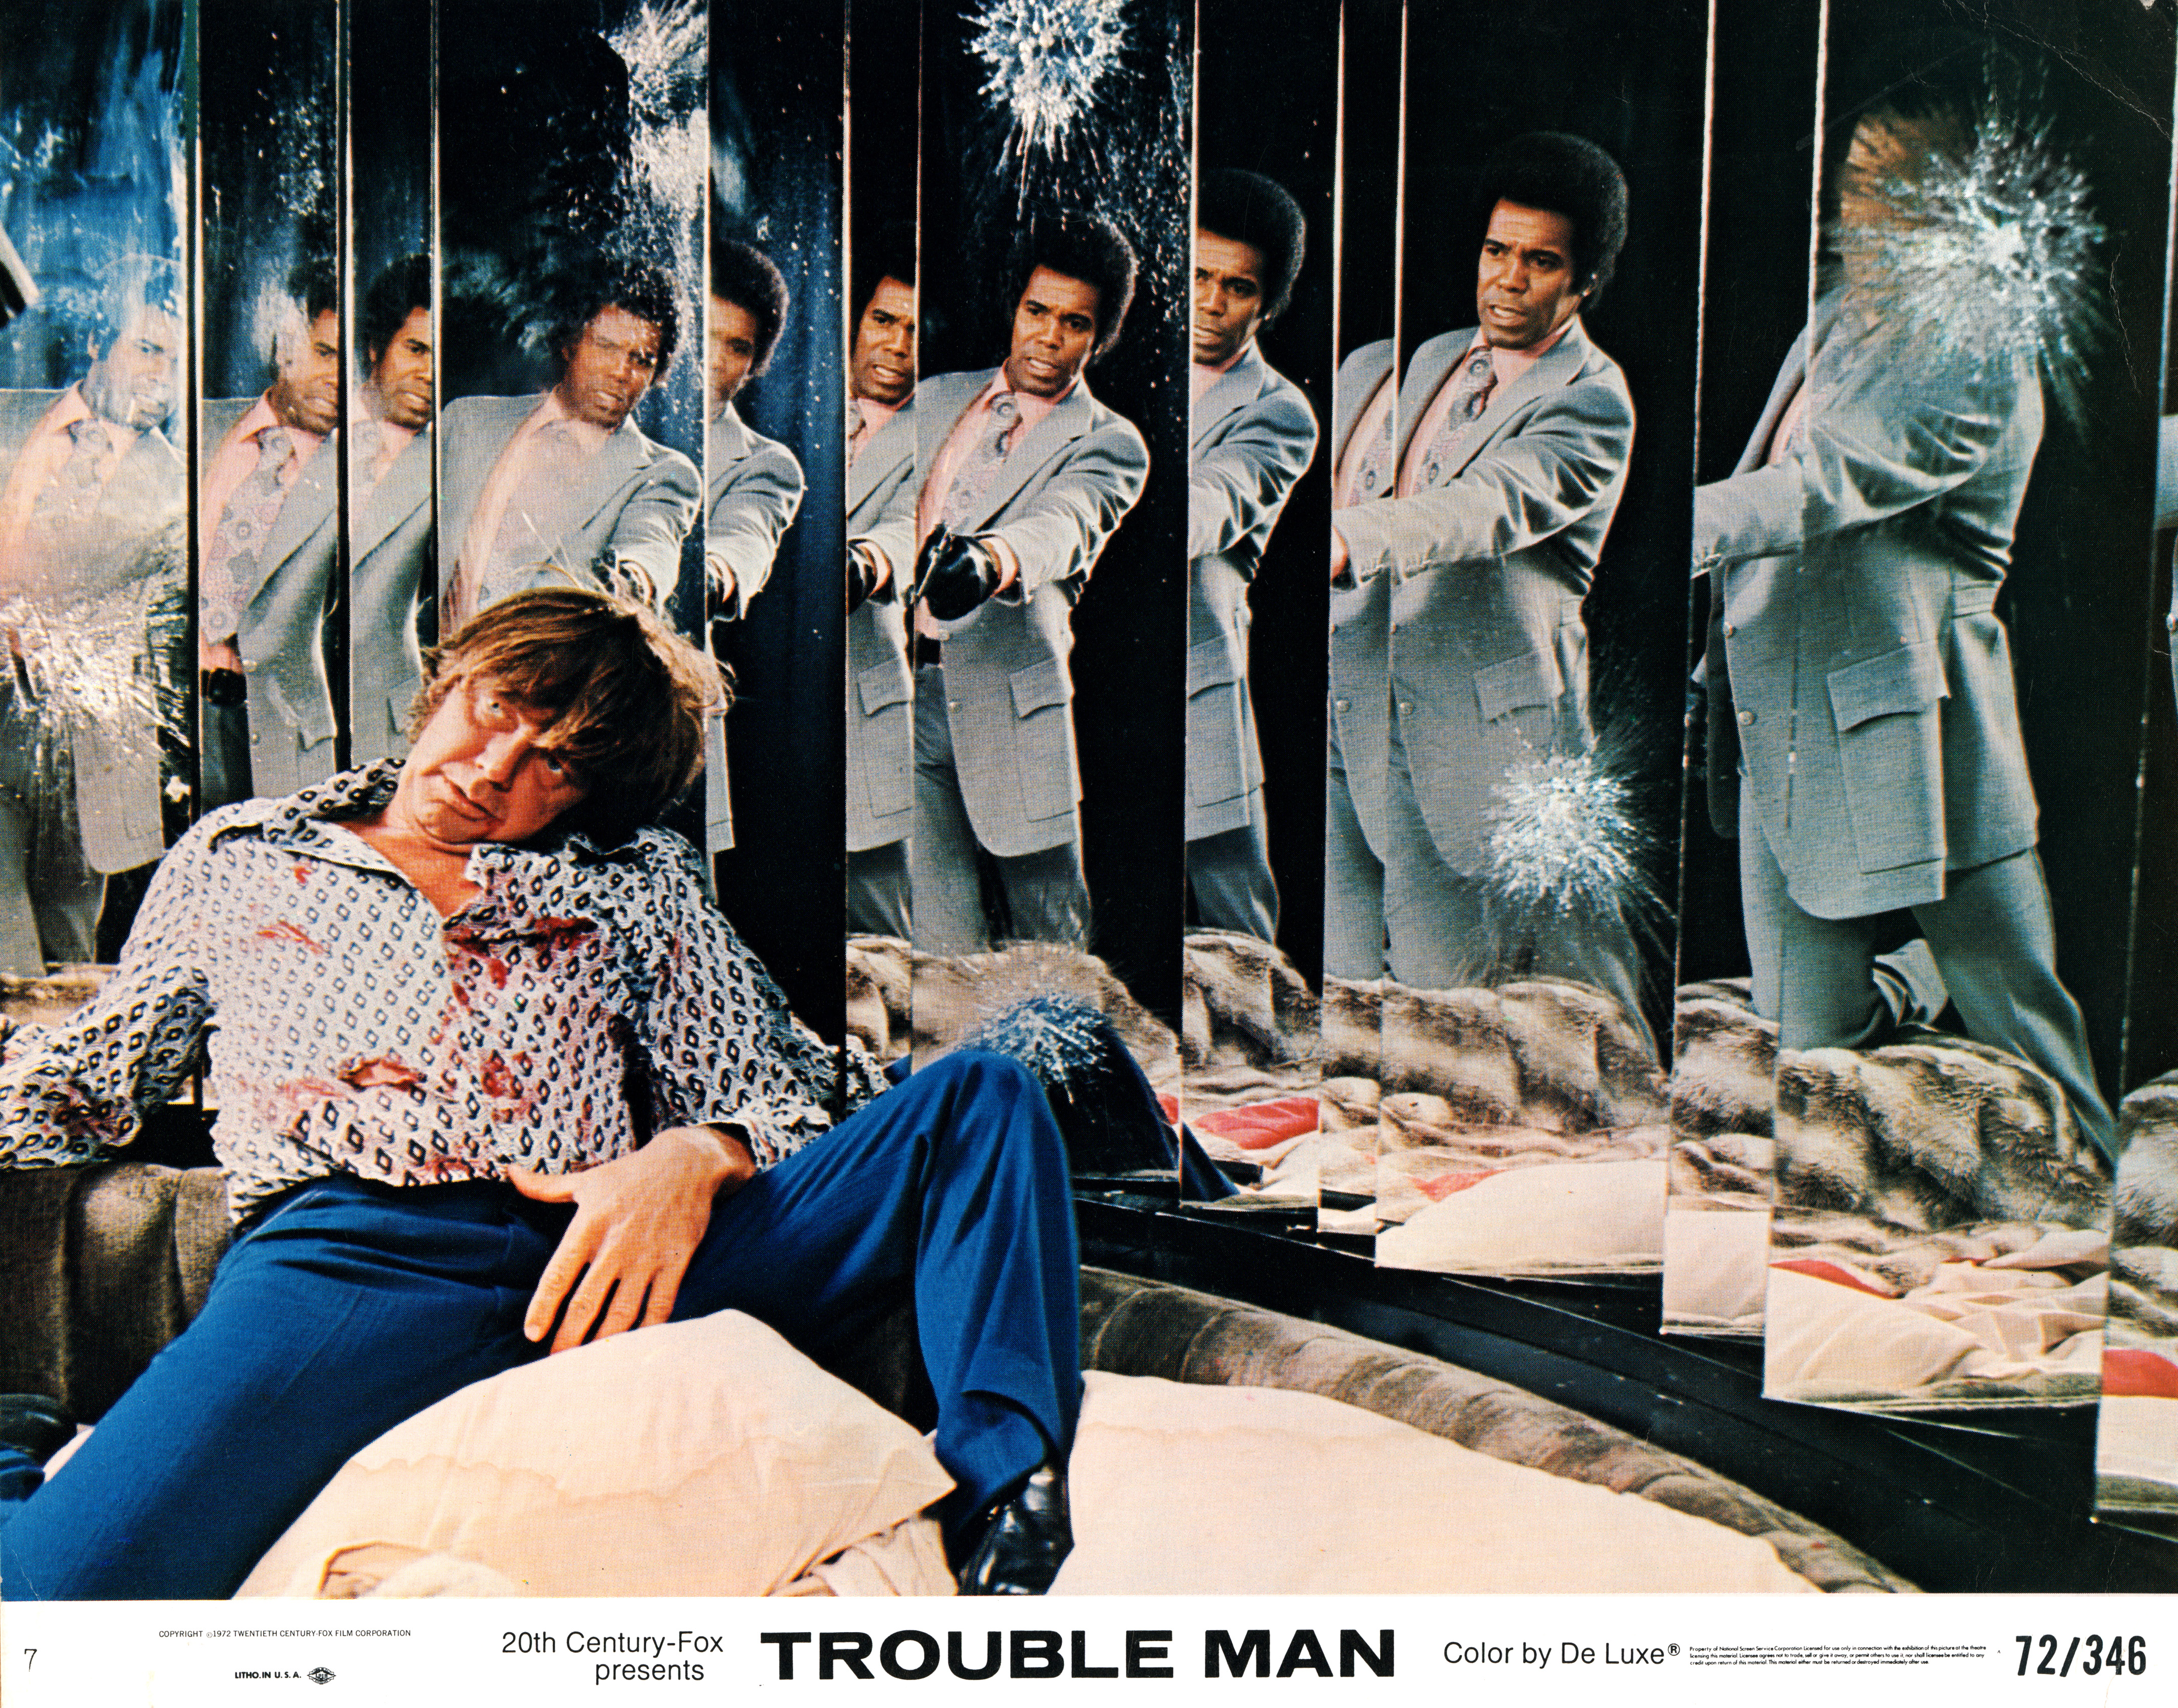 This is the lobby card from Trouble Man.